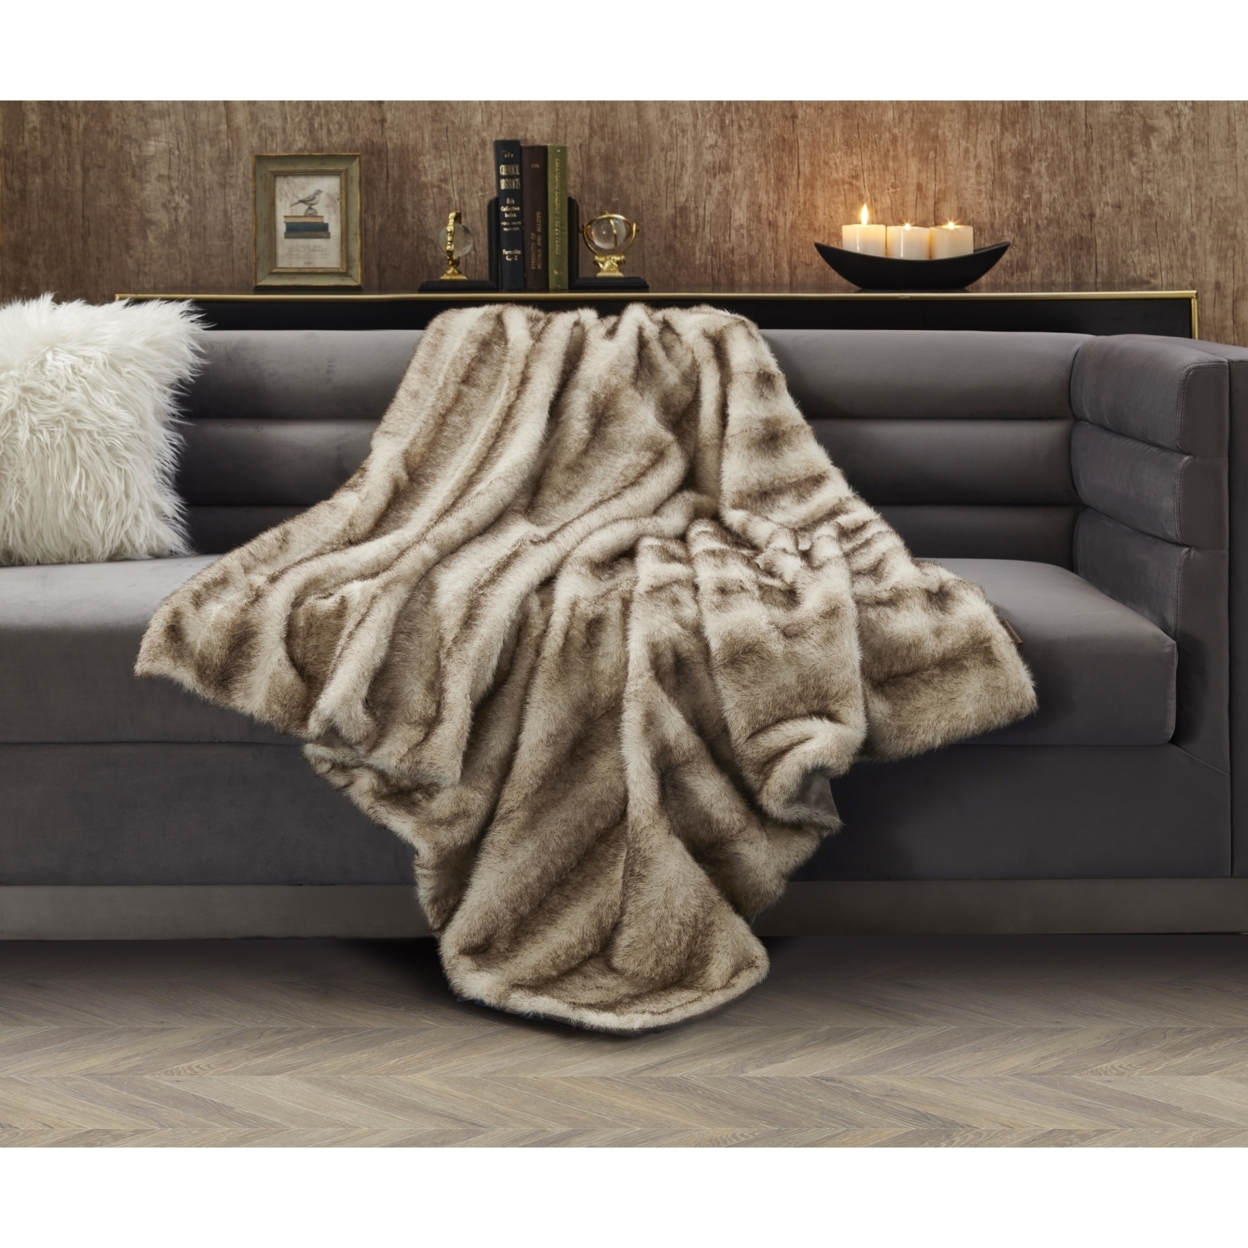 Avani Throw- Faux-Shaggy And Snuggly-Fluffy Cozy Texture - Brown Fox